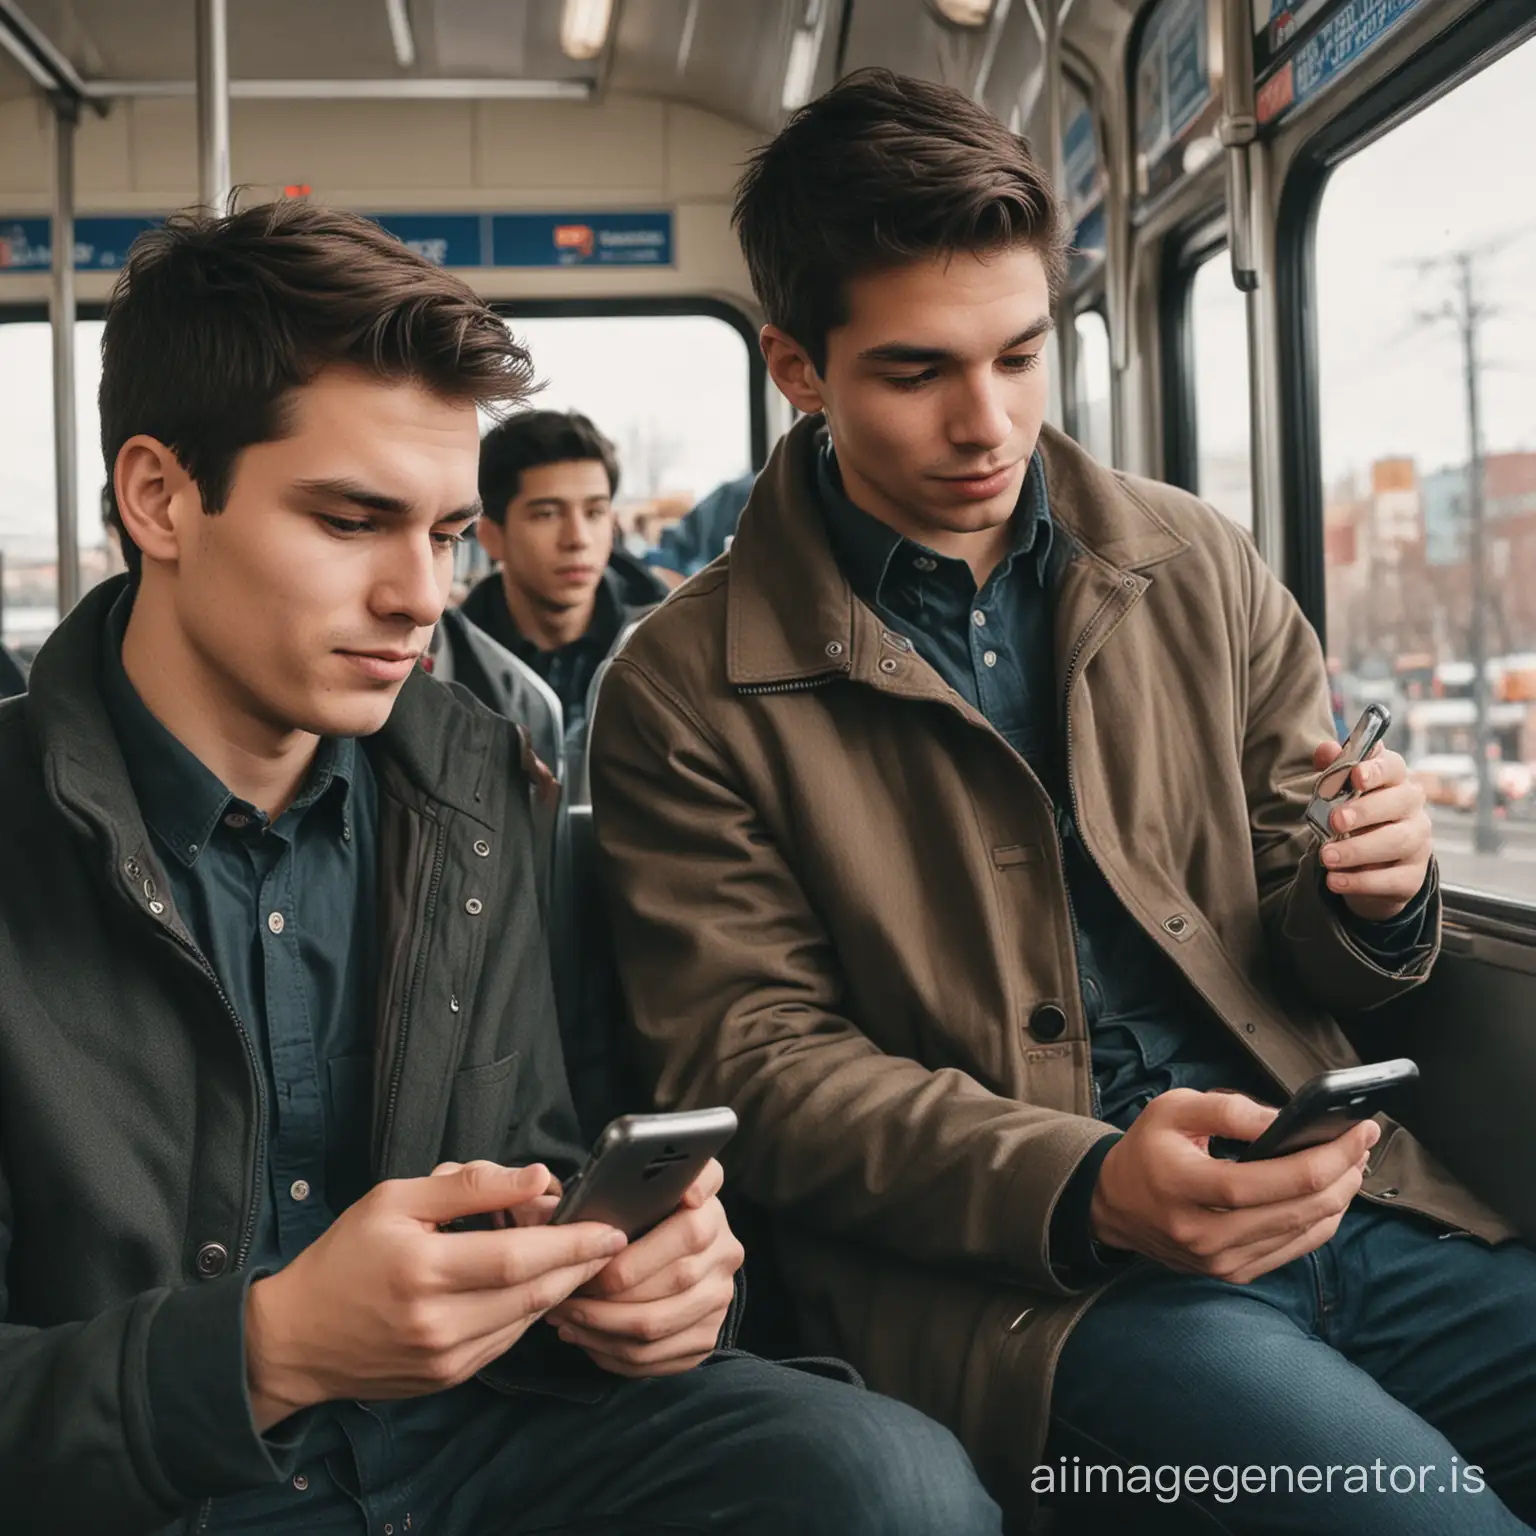 A scene on public transportation, with two young men seated next to each other on a bus or train, both immersed in their smartphones while commuting to their destination.